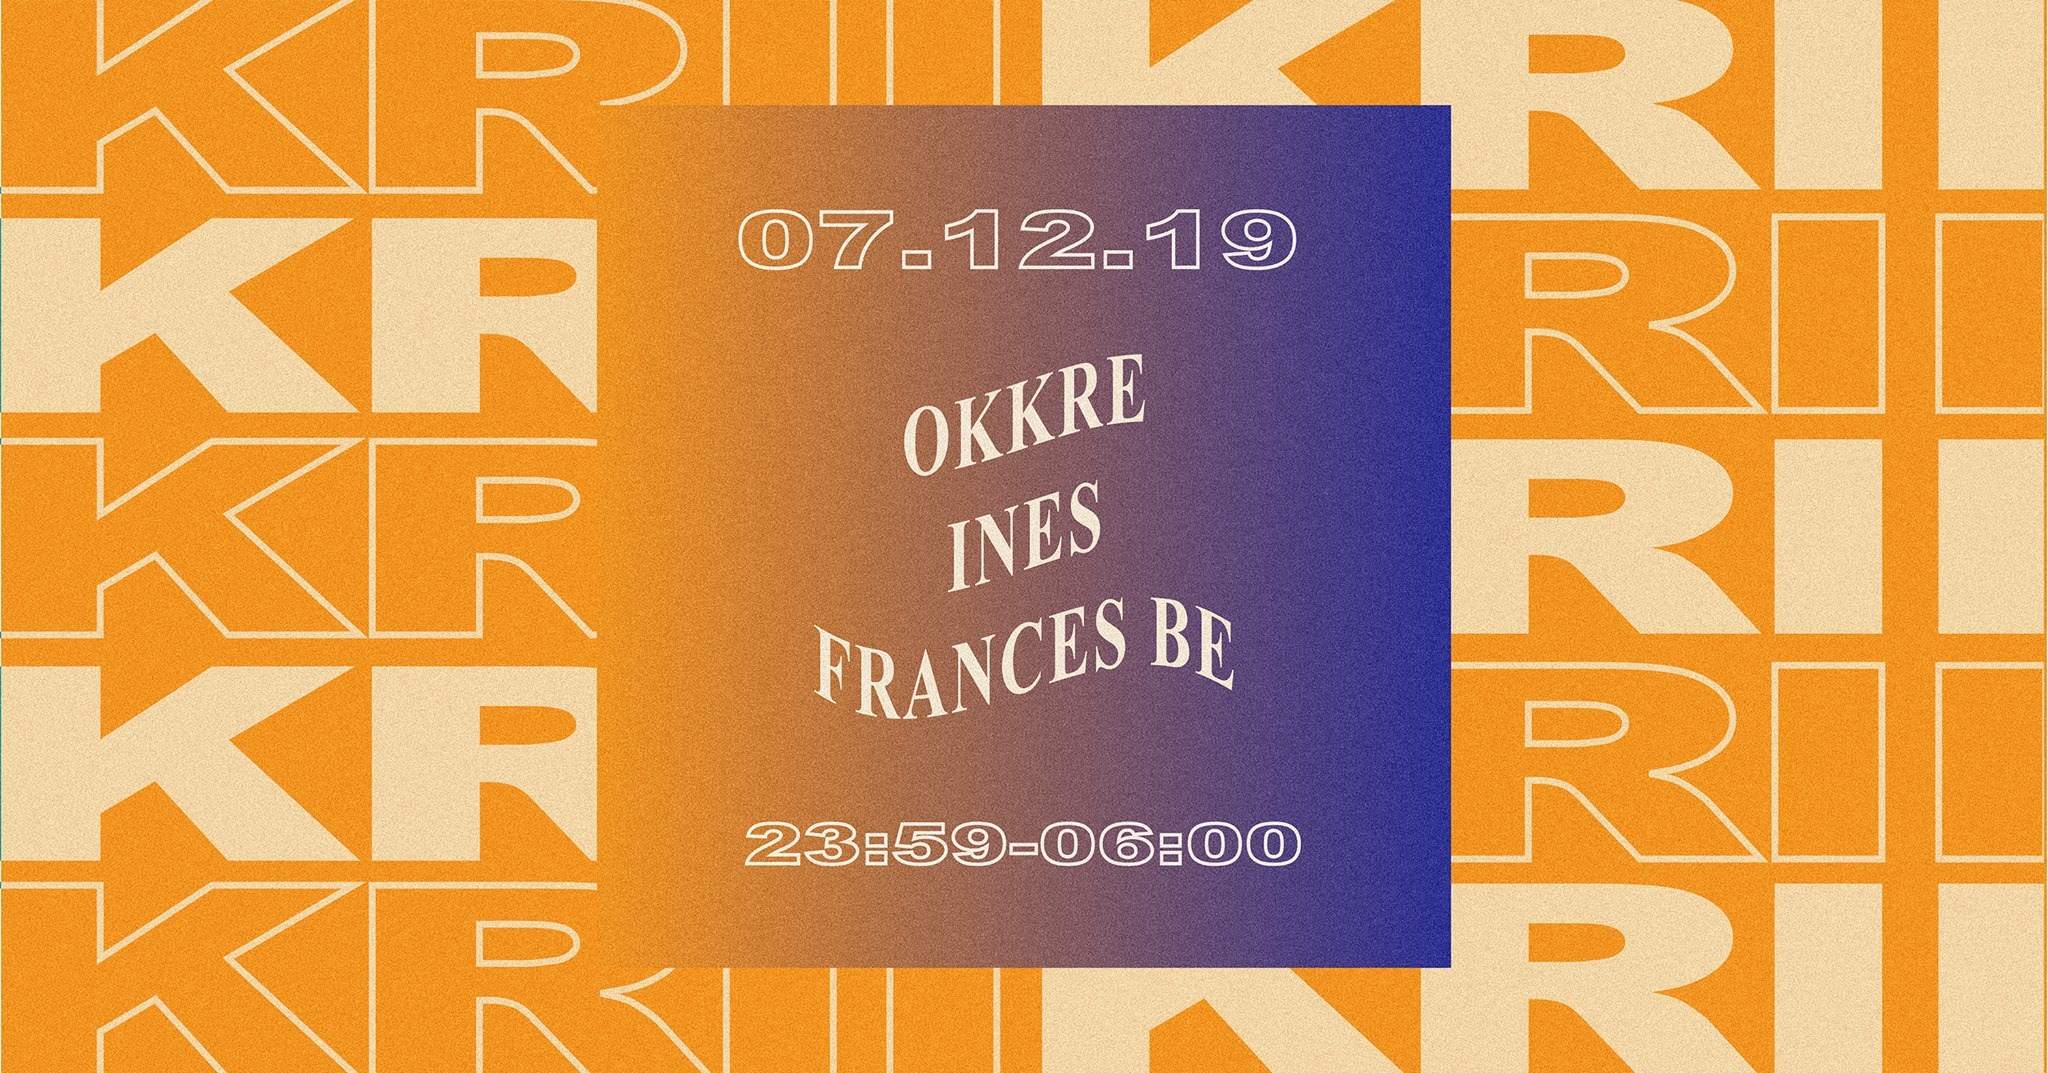 Krii Krii: Okkre Frances Be Ines - フライヤー表